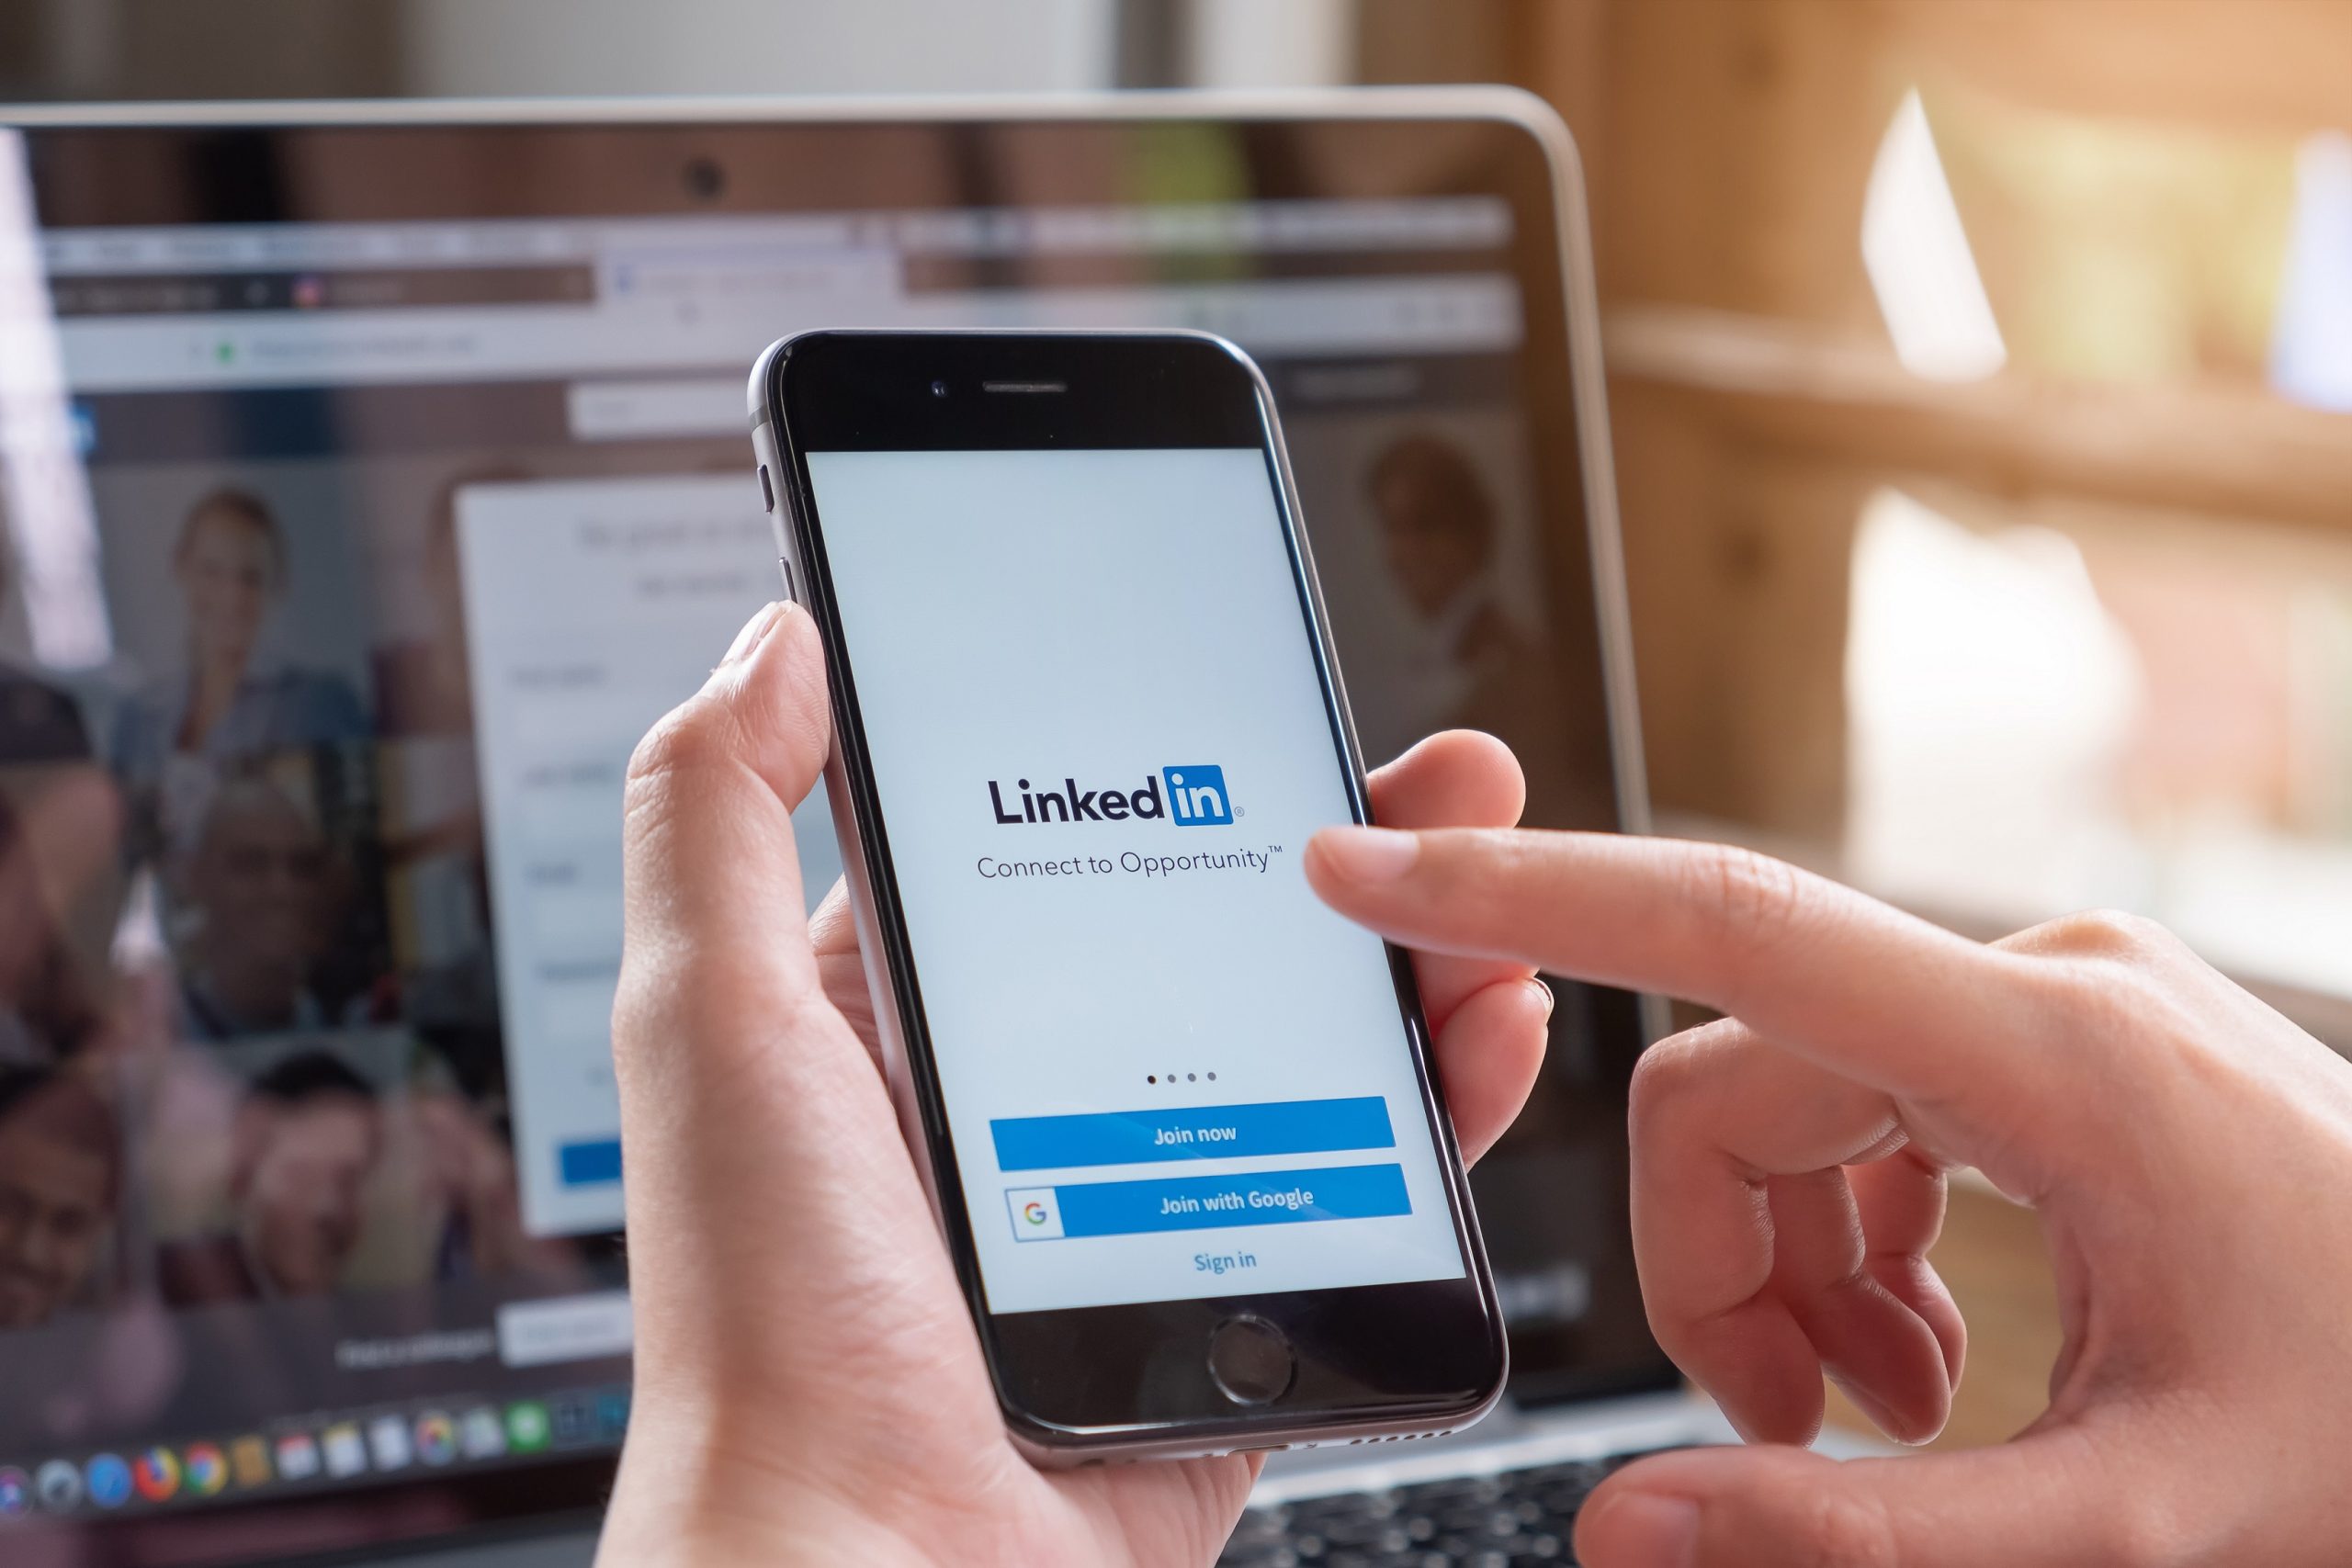 A recruiter’s guide to LinkedIn: What you should include to look attractive to employers